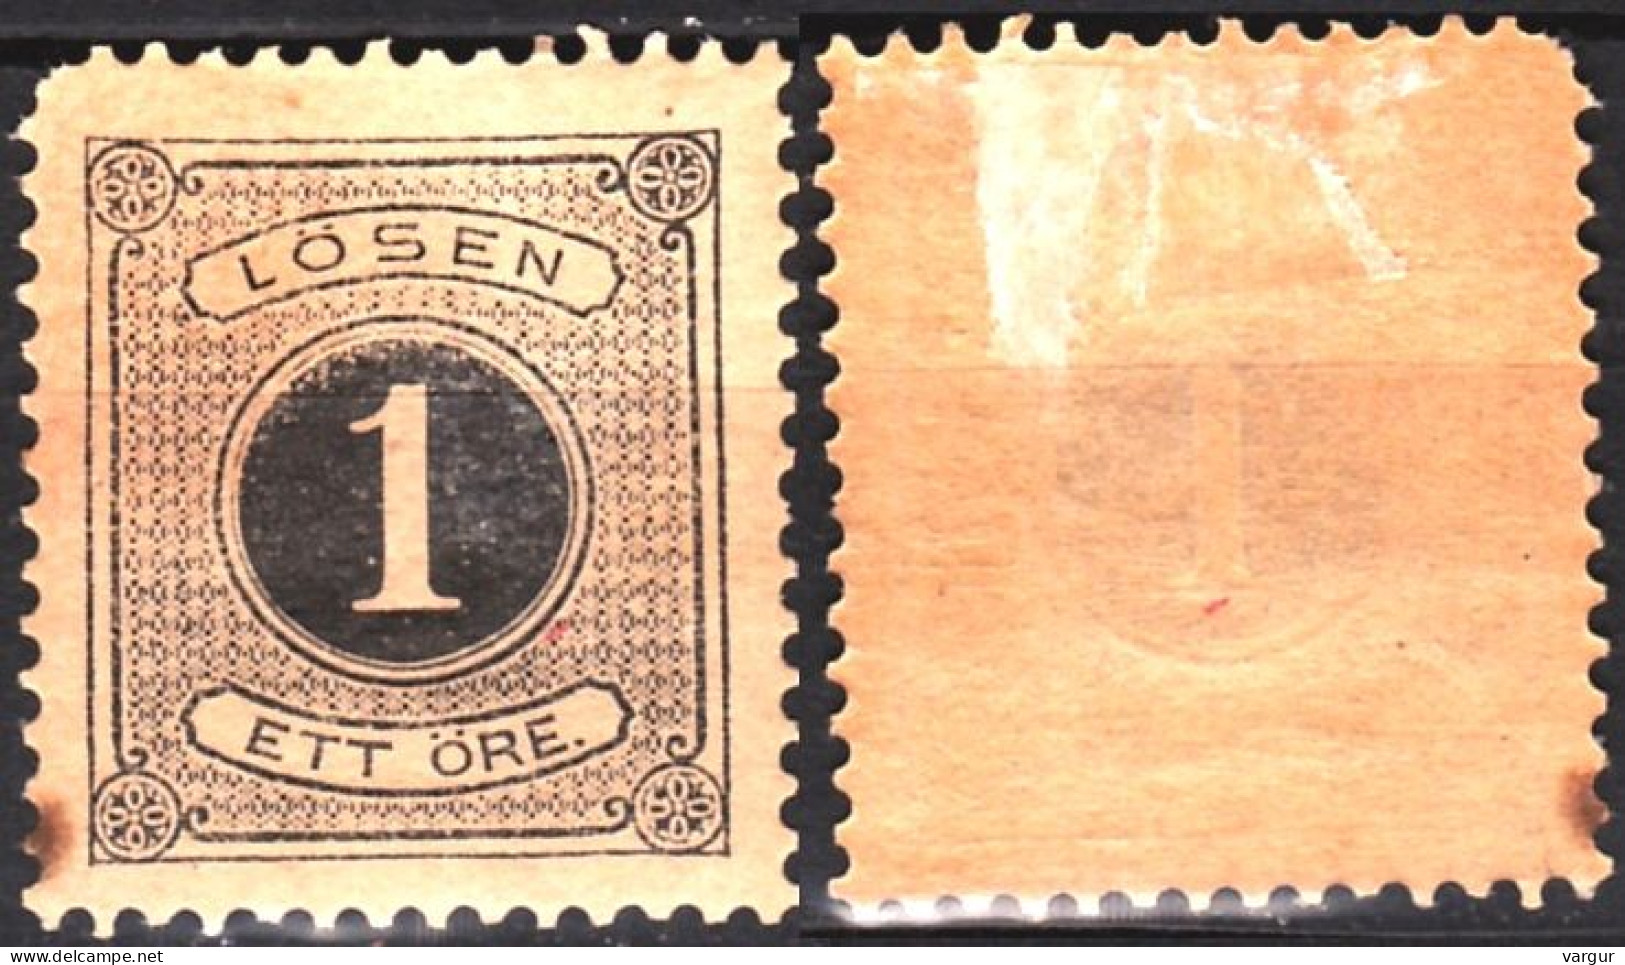 SWEDEN Postage Due 1877 Figure In Circle. 1o Black. Perf 13, MH Lot #1 - Taxe